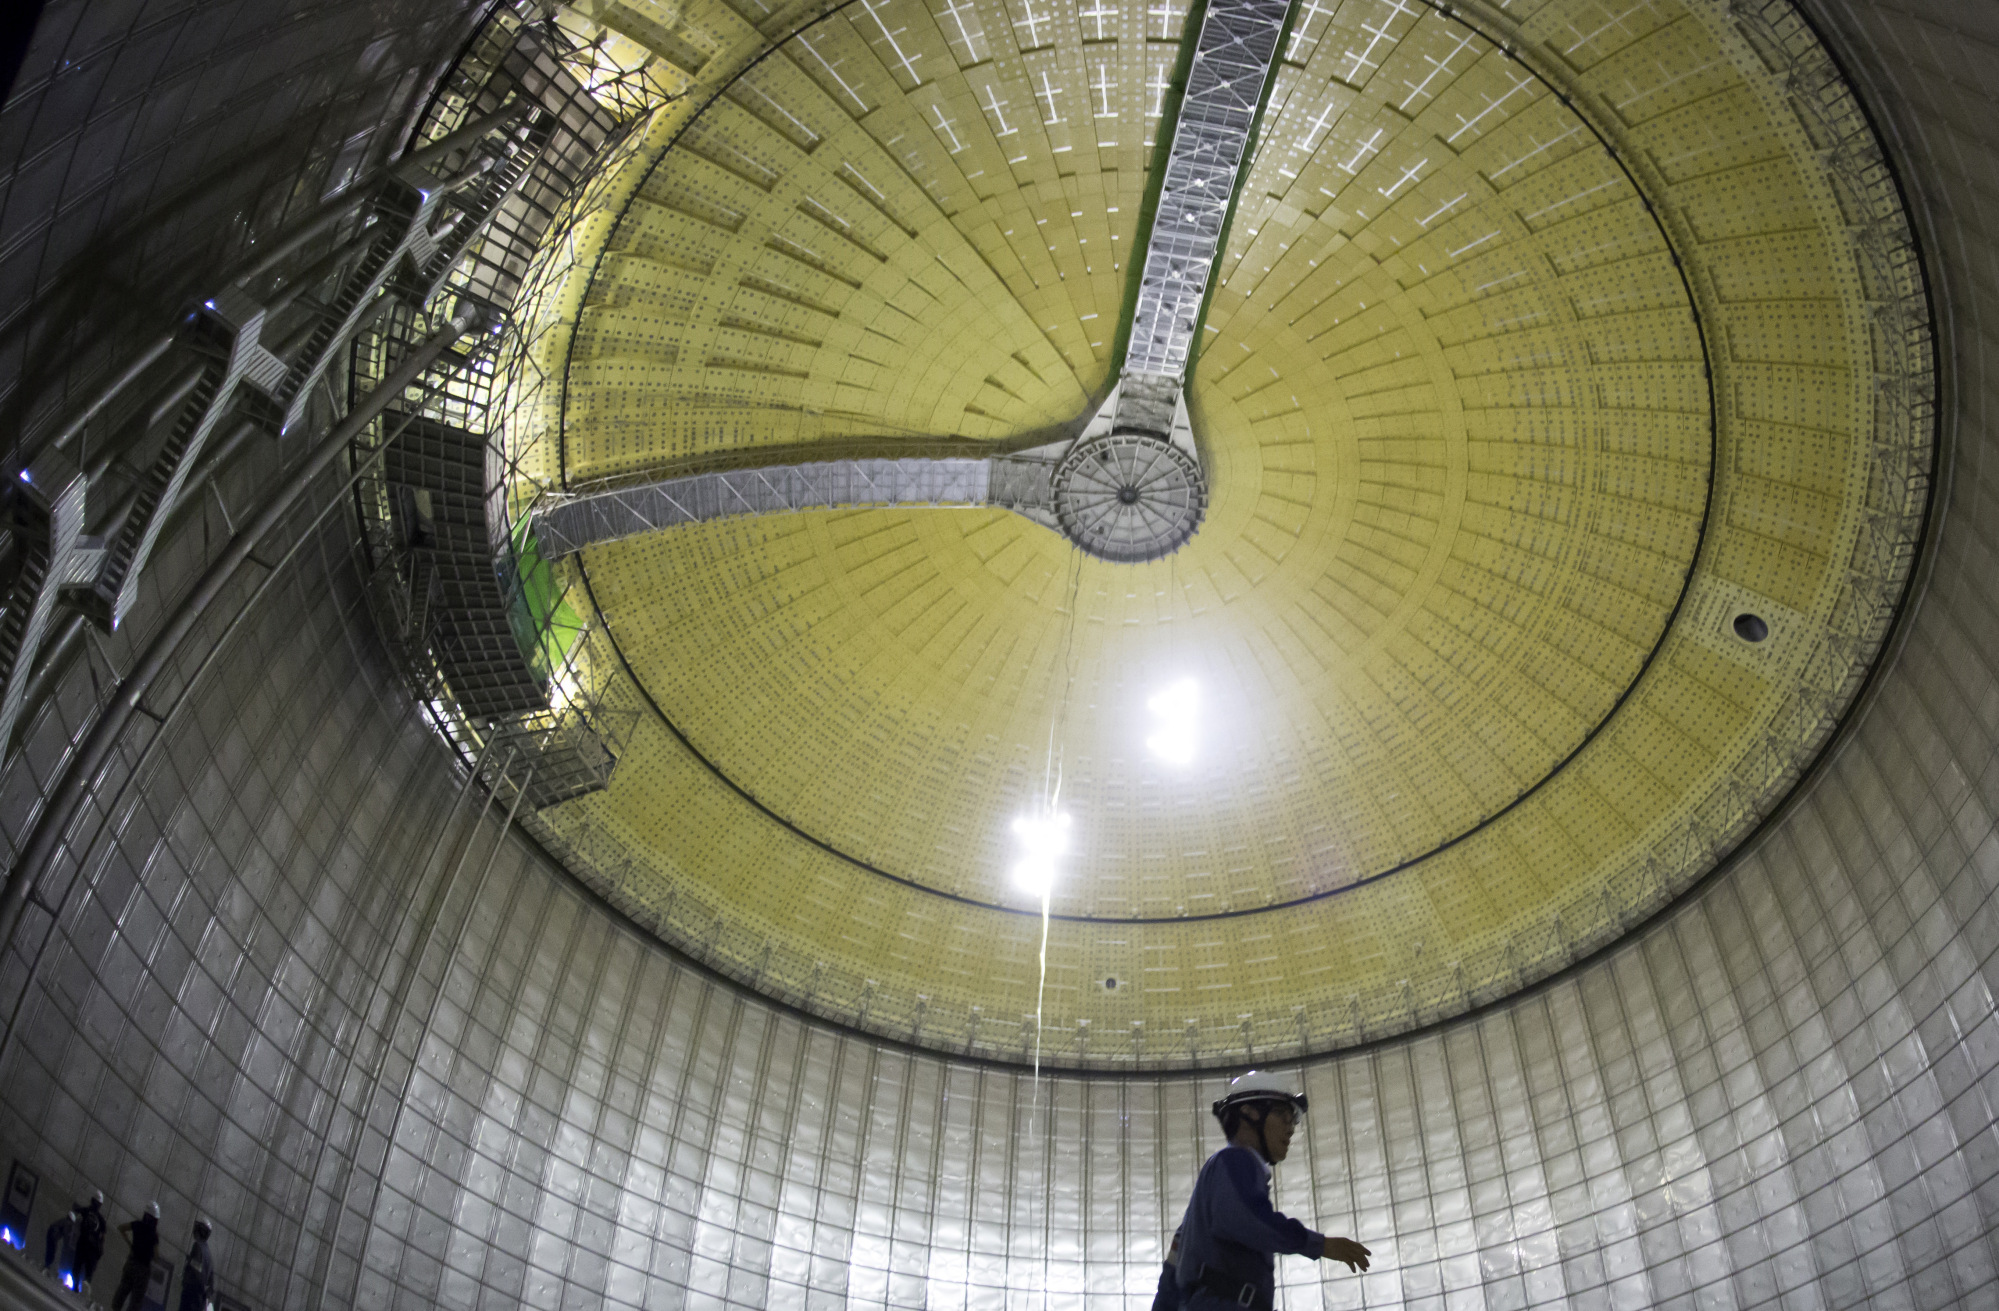 A Tokyo Electric Power Co. (Tepco) employee walks inside the company's liquefied natural gas (LNG) storage tank as it stands under construction at the Futtsu gas-fired thermal power plant in Futtsu, Chiba Prefecture, Japan, on Monday, Sept. 10, 2018.  Photographer: Tomohiro Ohsumi/Bloomberg